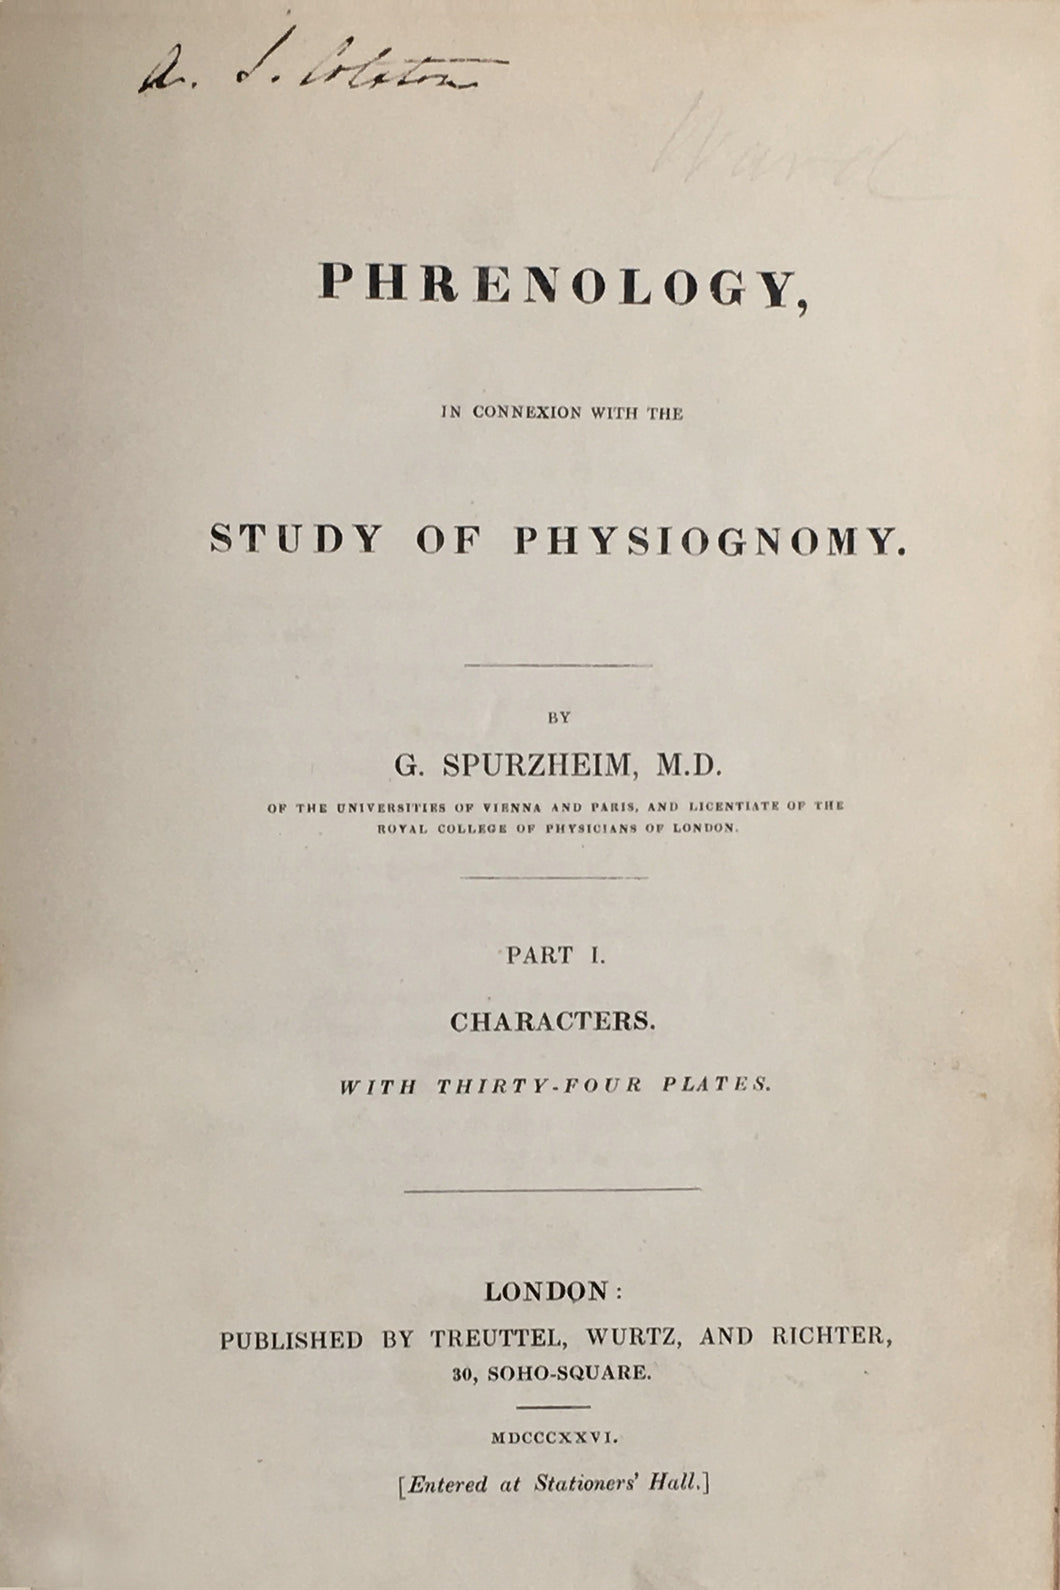 Phrenology, in connexion with the study of physiognomy.